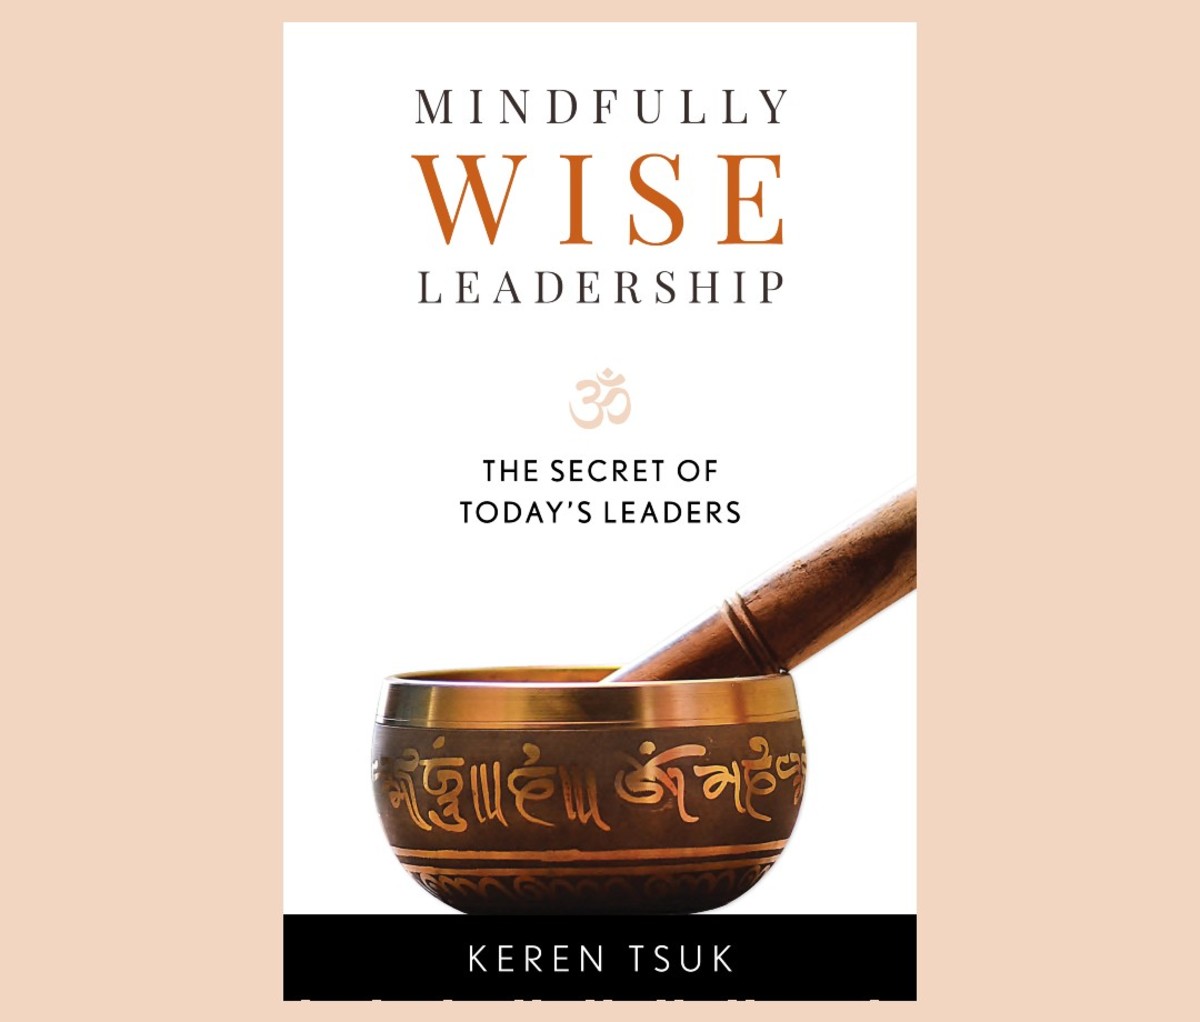 Mindful Wise Leadership: The Secret of Today's Leaders by Keren Tsuk, PhD